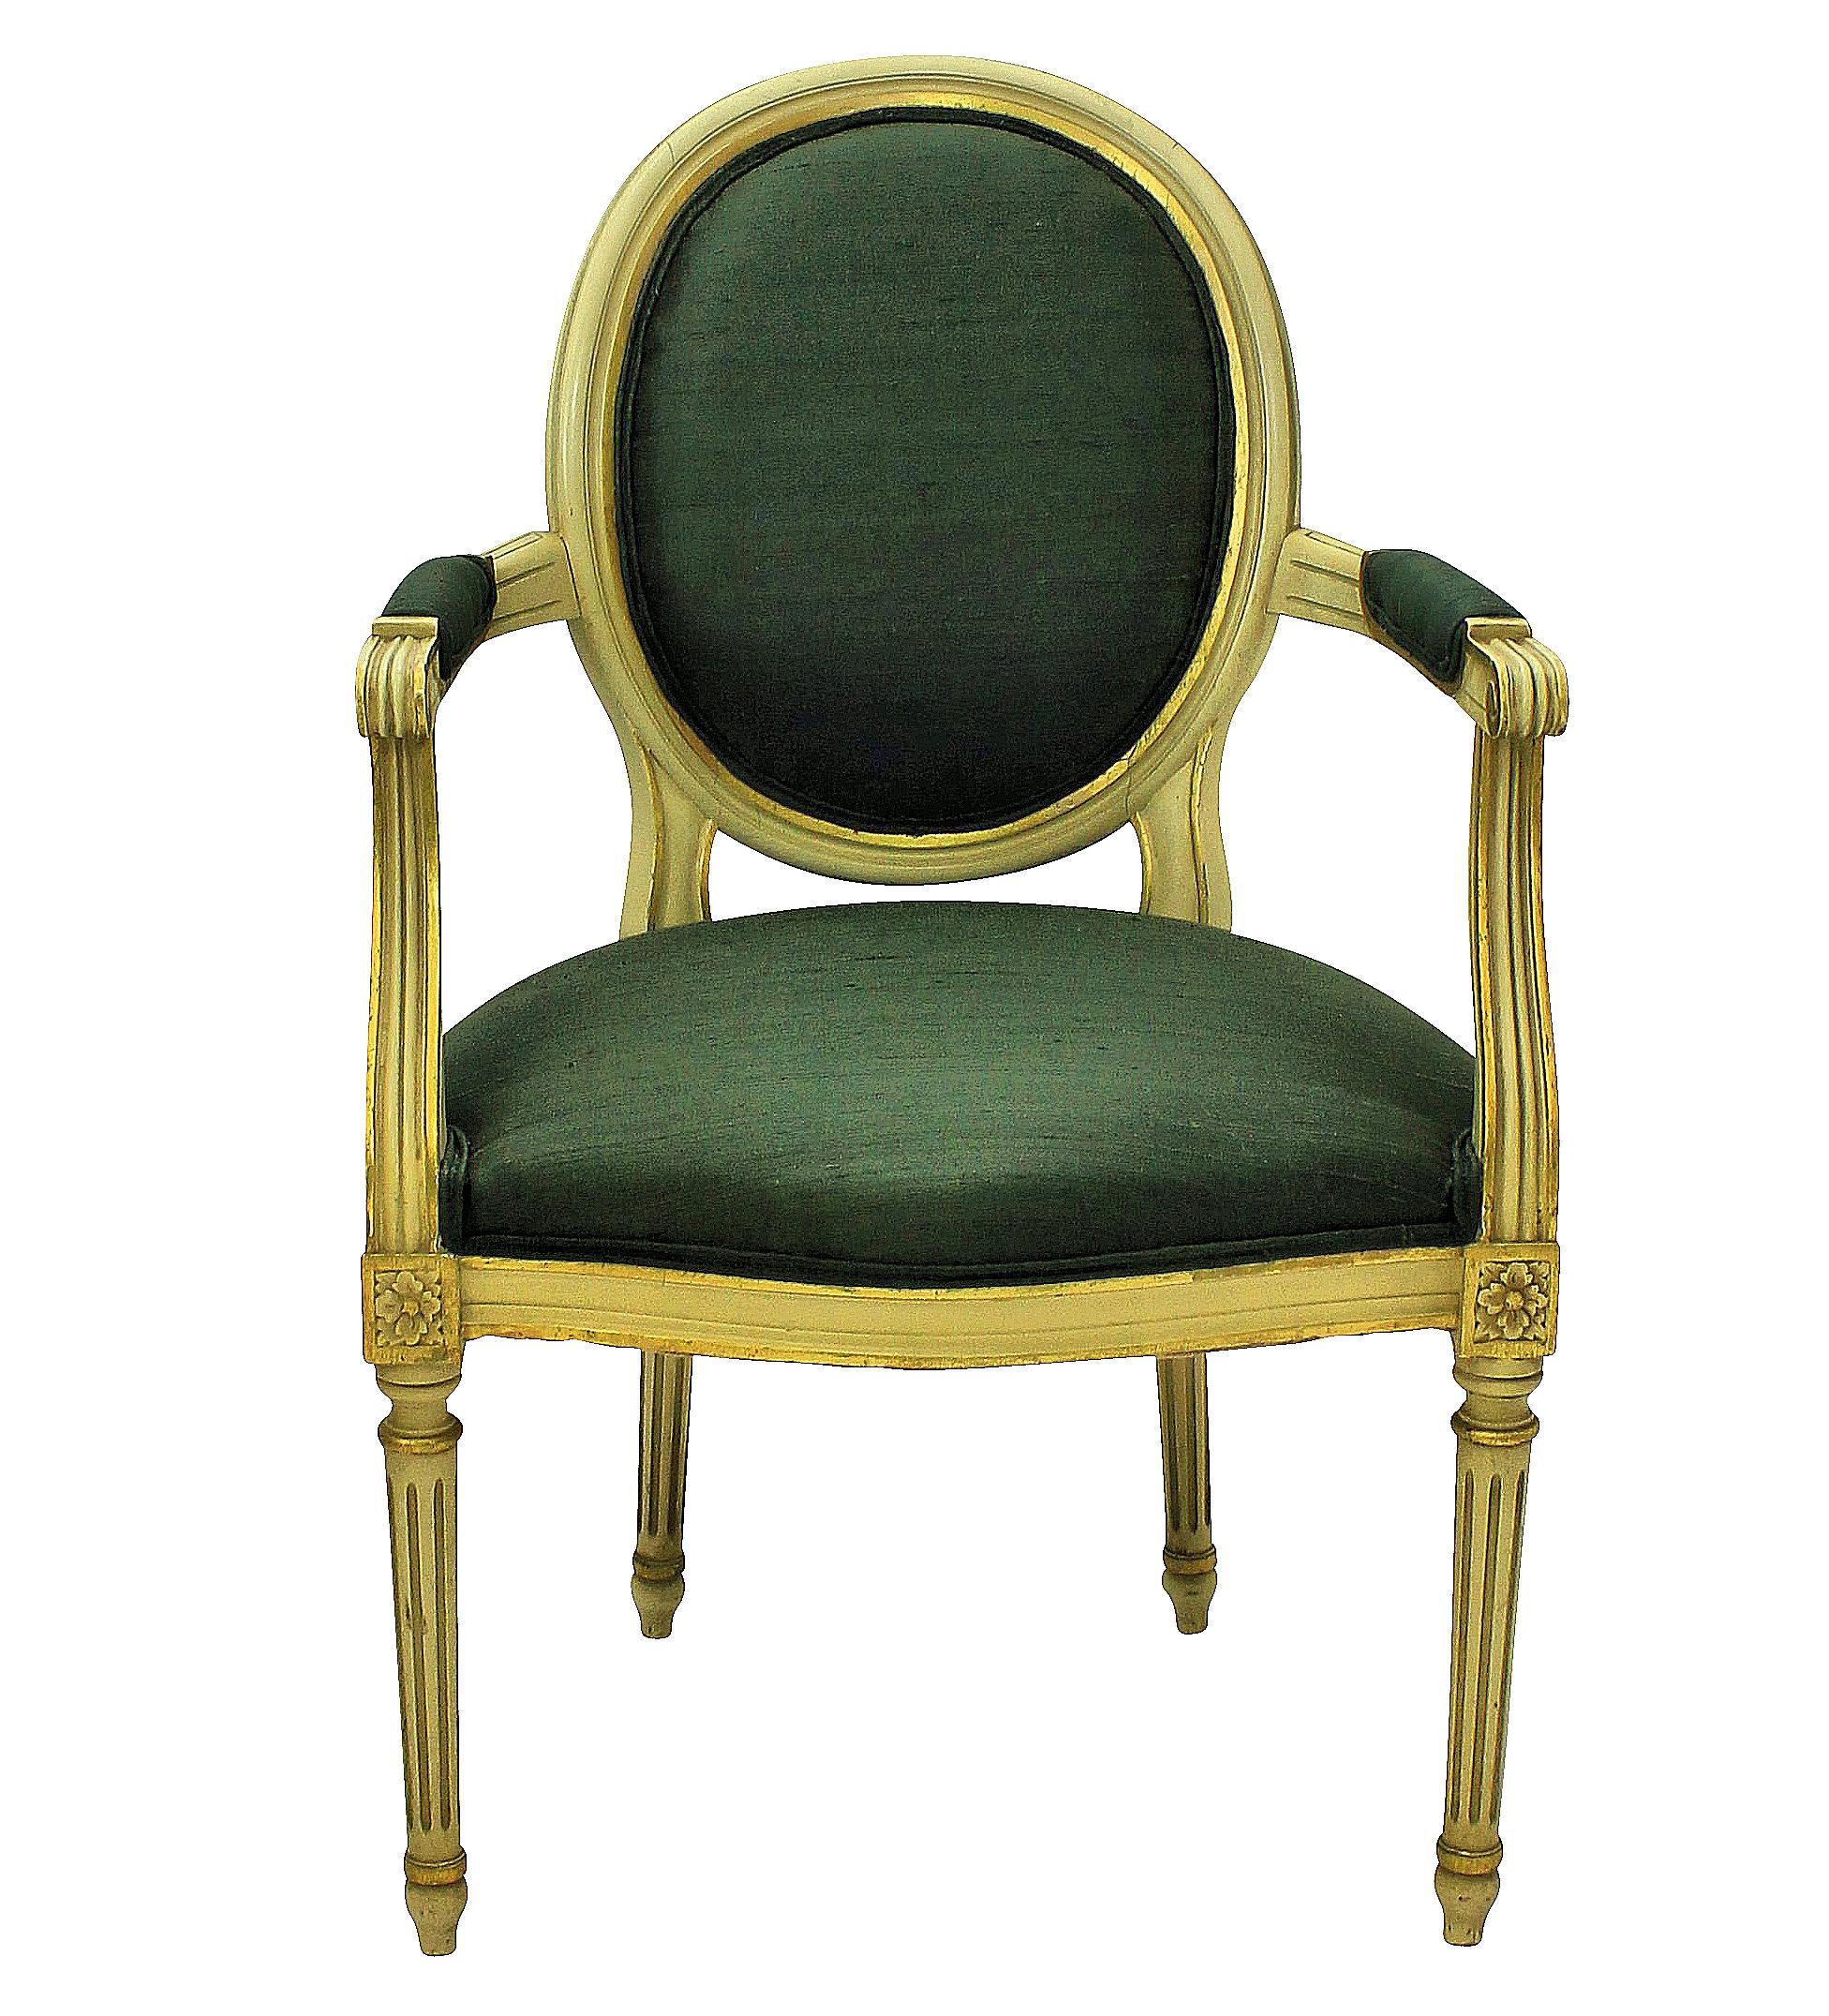 A pair of French painted and gilded Louis XV style armchairs upholstered in sage green silk.
 